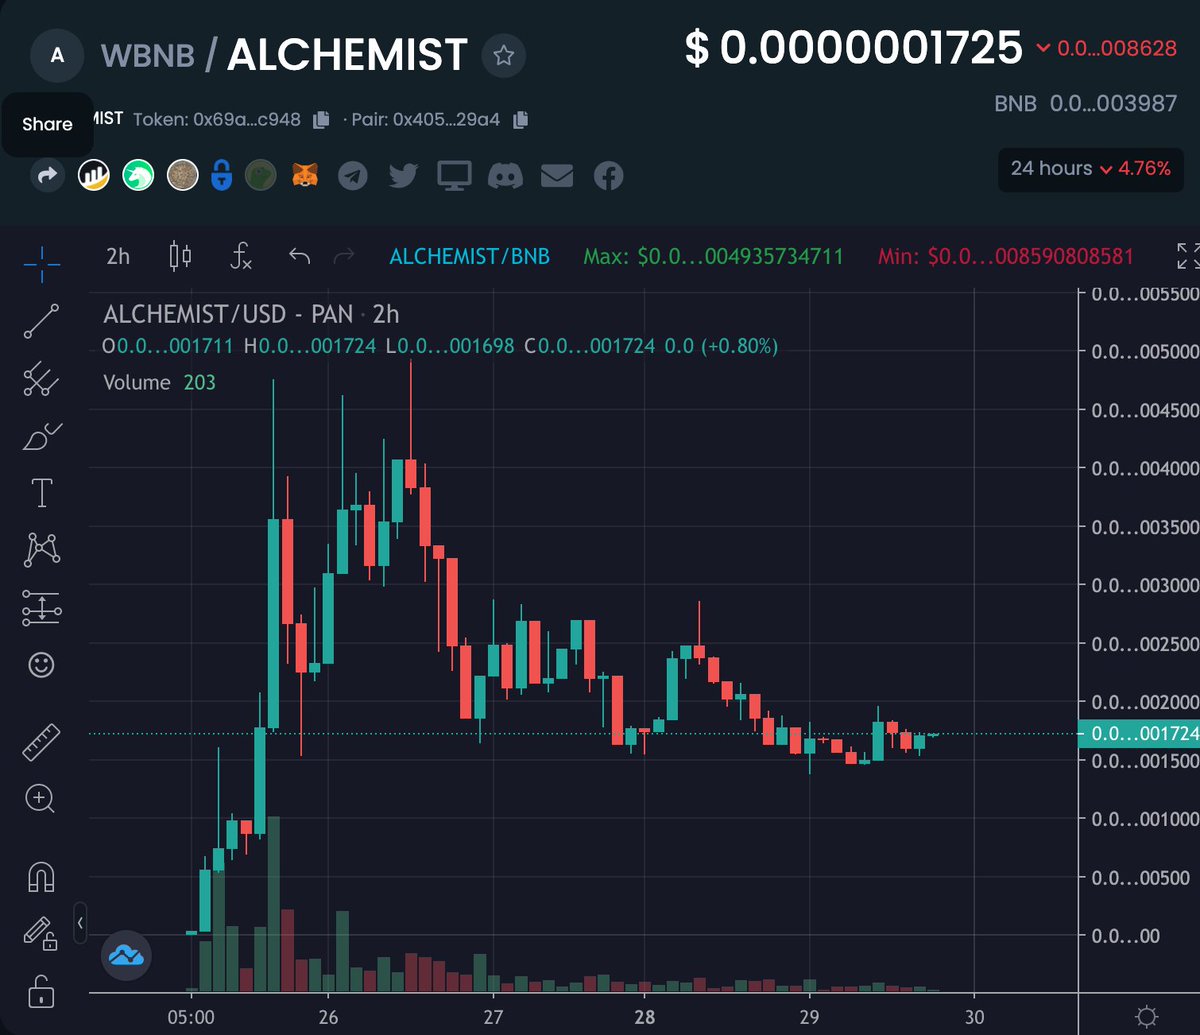 Alpha for u guys #BSC #alchemist Some great things are ready down the line. Top marketer and dev. Solid floor and UP from here. Worth checking PCS: pancakeswap.finance/swap?inputCurr… Chart: dextools.io/app/bsc/pair-e… Tg: t.me/AlchemistBSC #BSCGem #100xgem